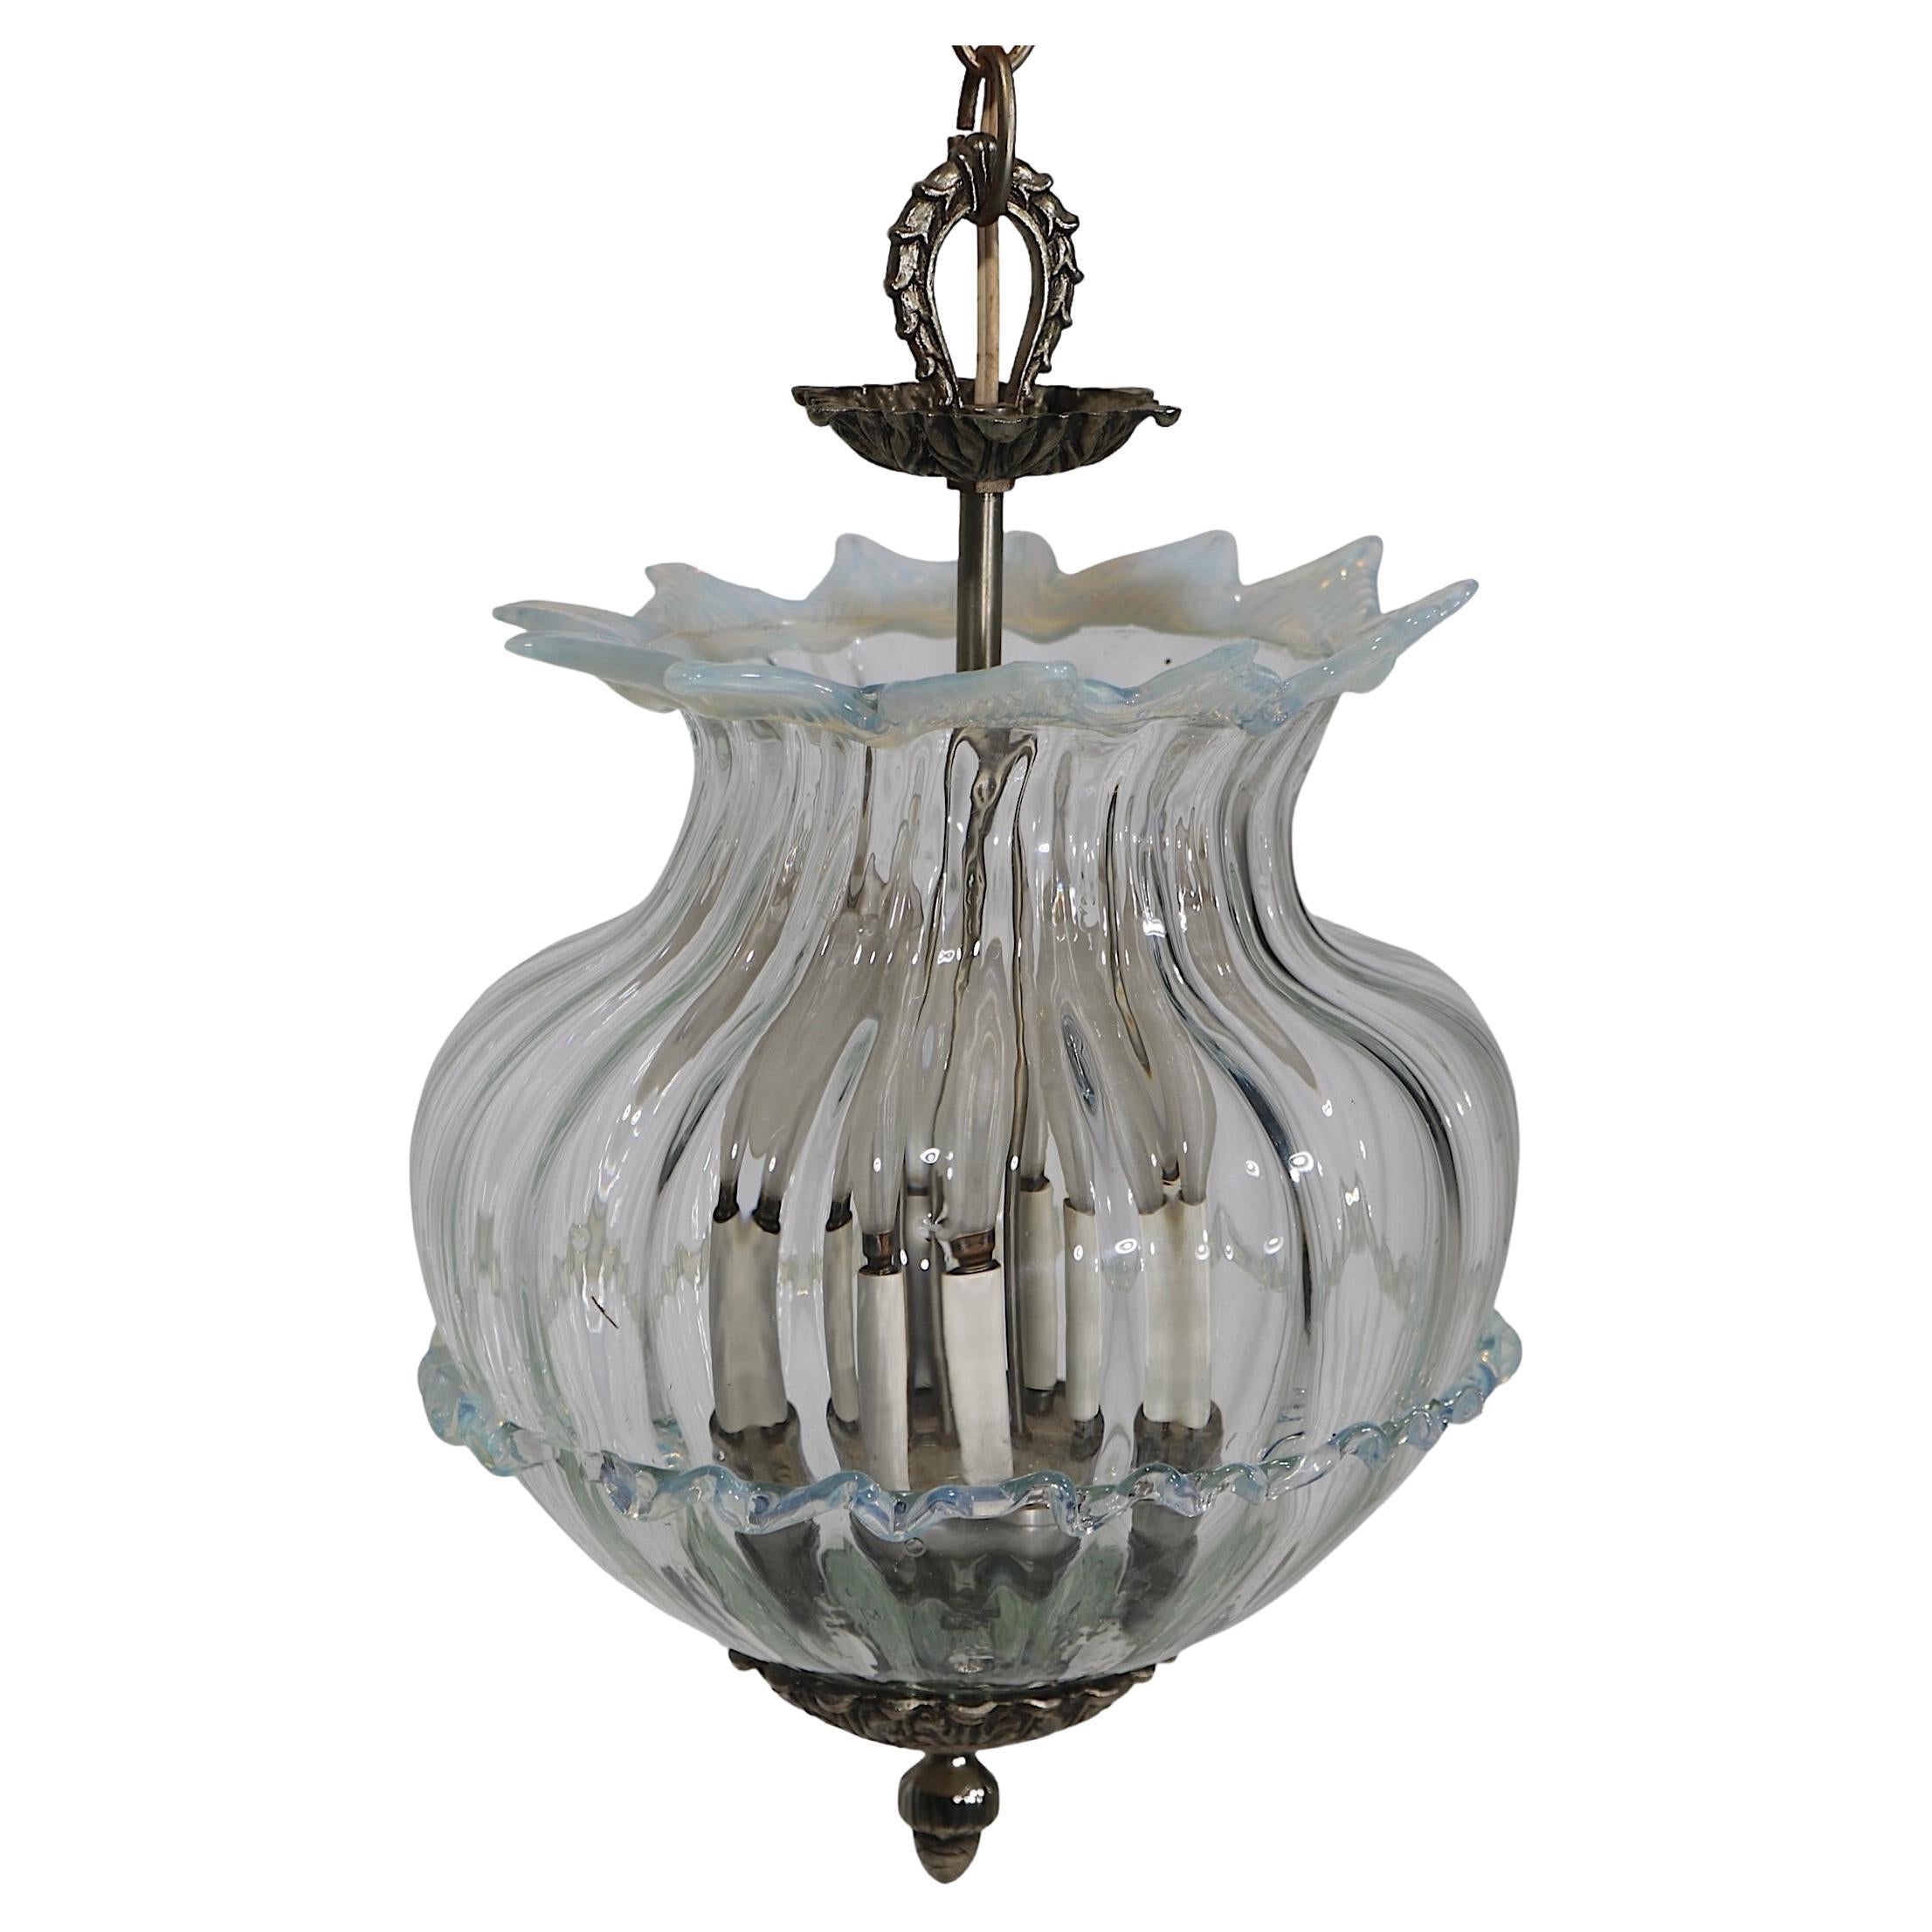 Elegant, voguish and chic art glass pendant  chandelier having an ornate bowl form globe, with rococo cast metal hardware. The glass element was made in Murano, Italy, with the metal elements made in the USA. The fixture was also  assembled and